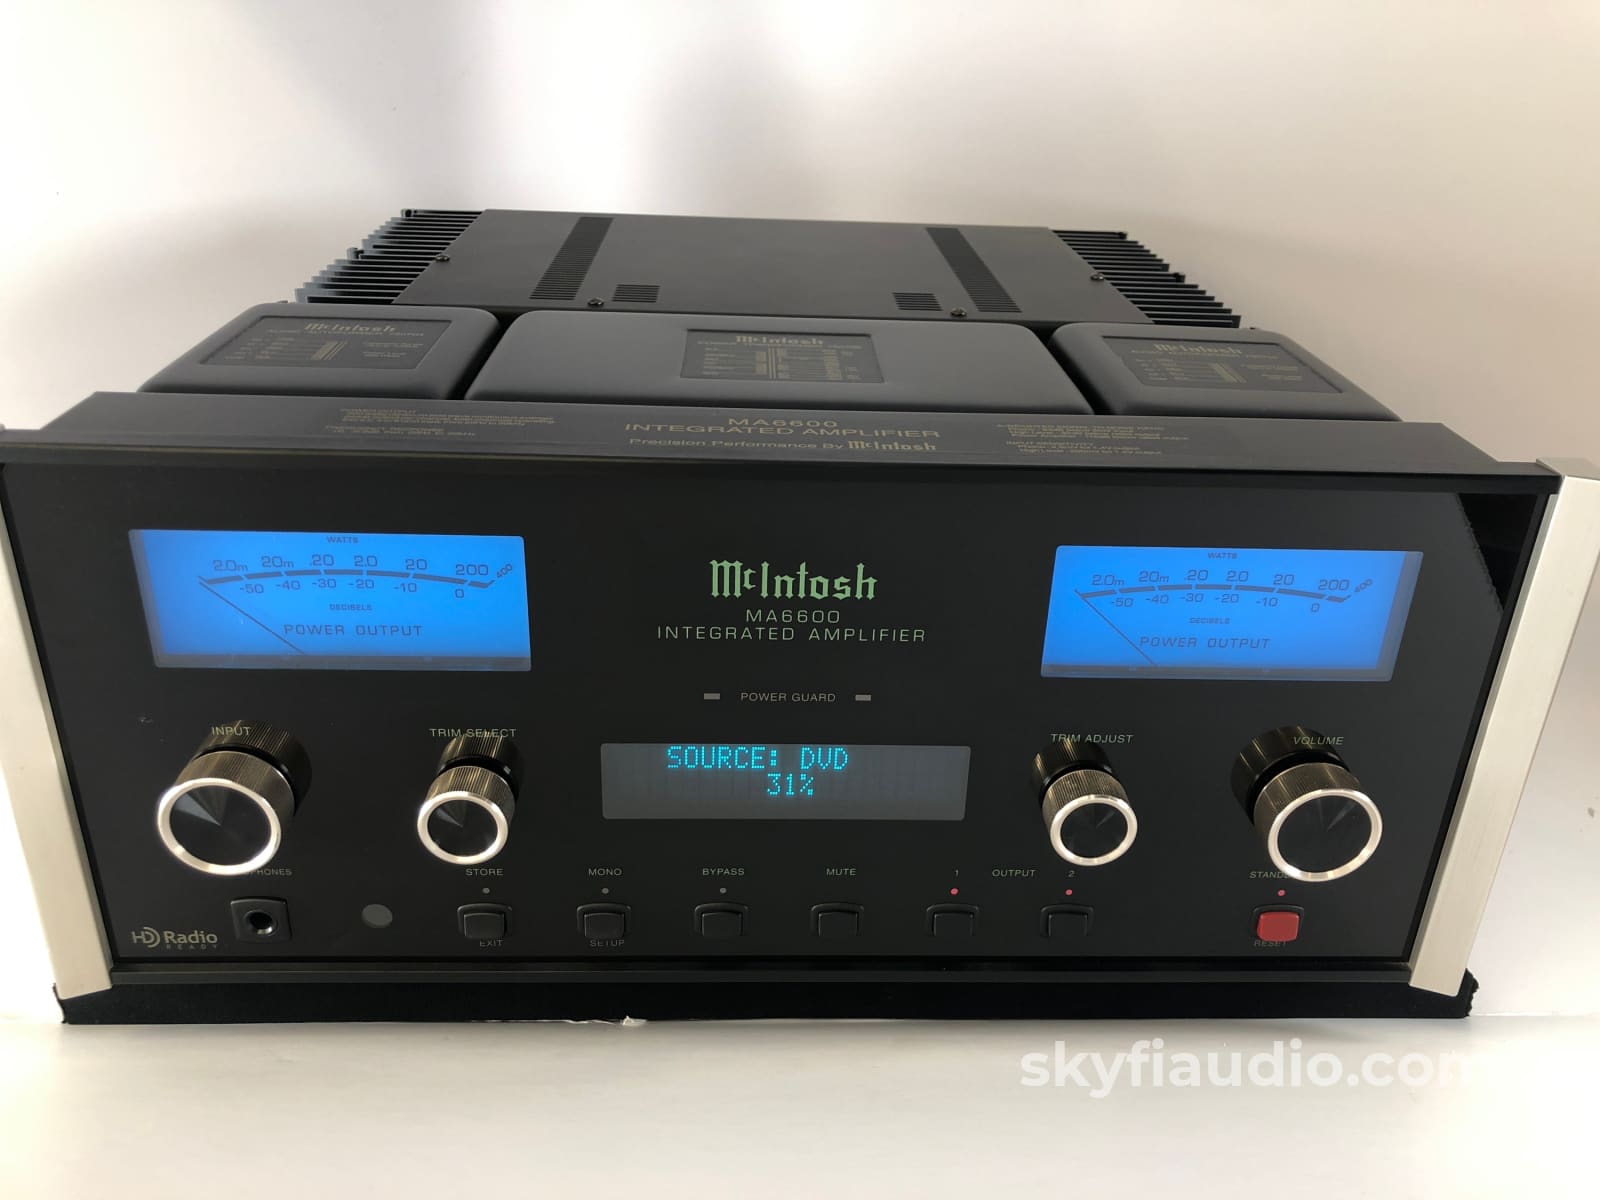 Mcintosh Ma6600 Integrated Amplifier 200W! Upgradable + Complete Set